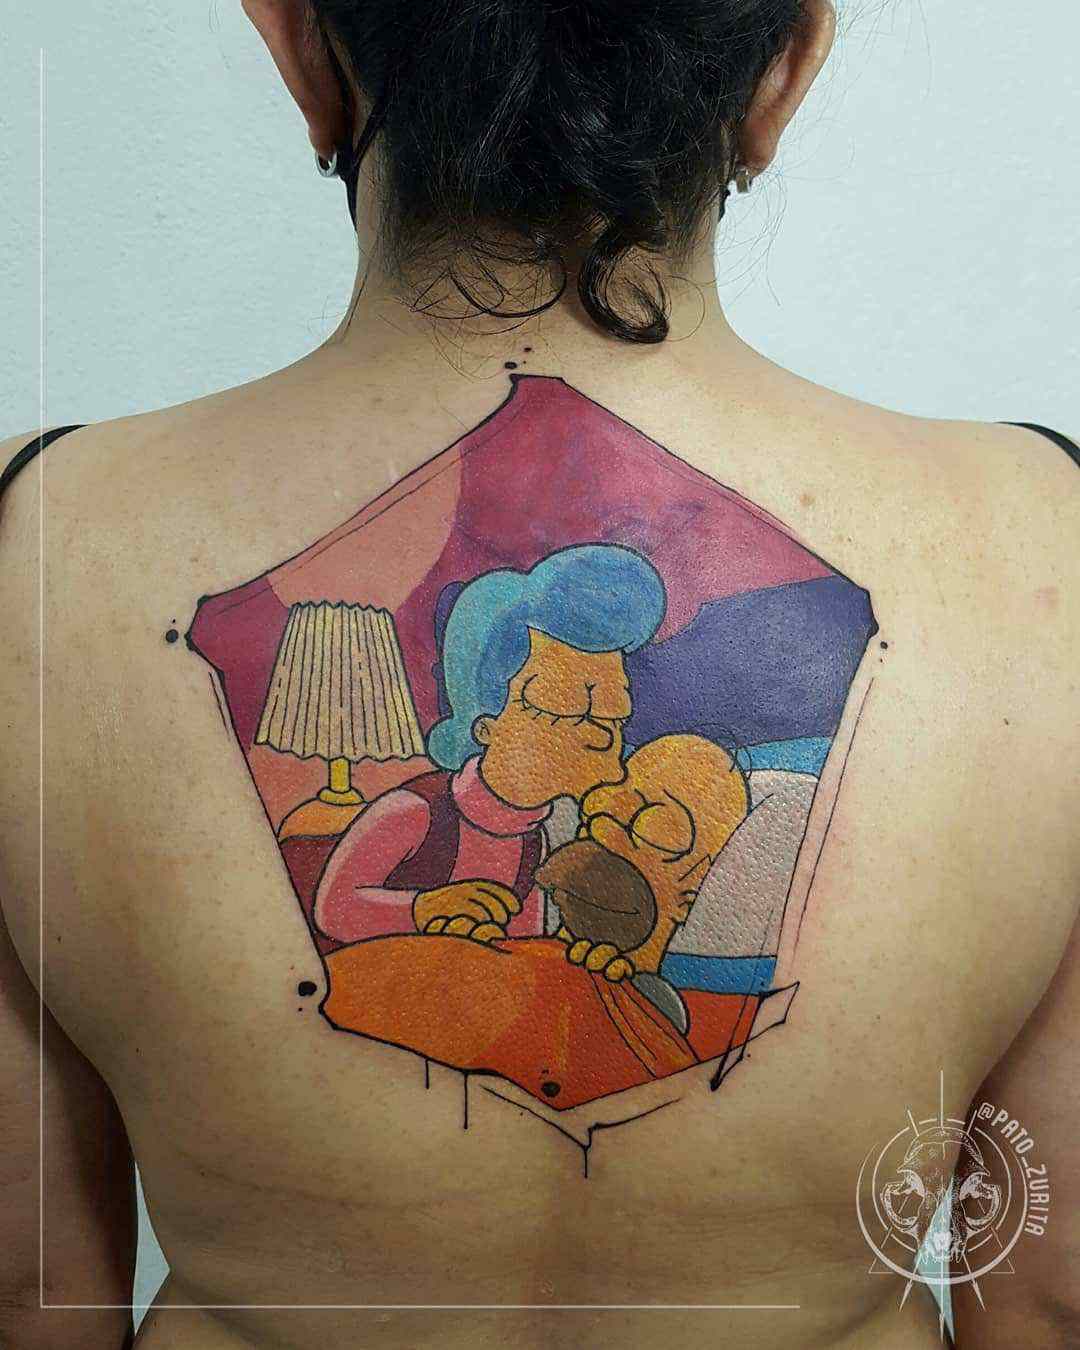 mom puts Homer to bed tattoo based on The Simpsons